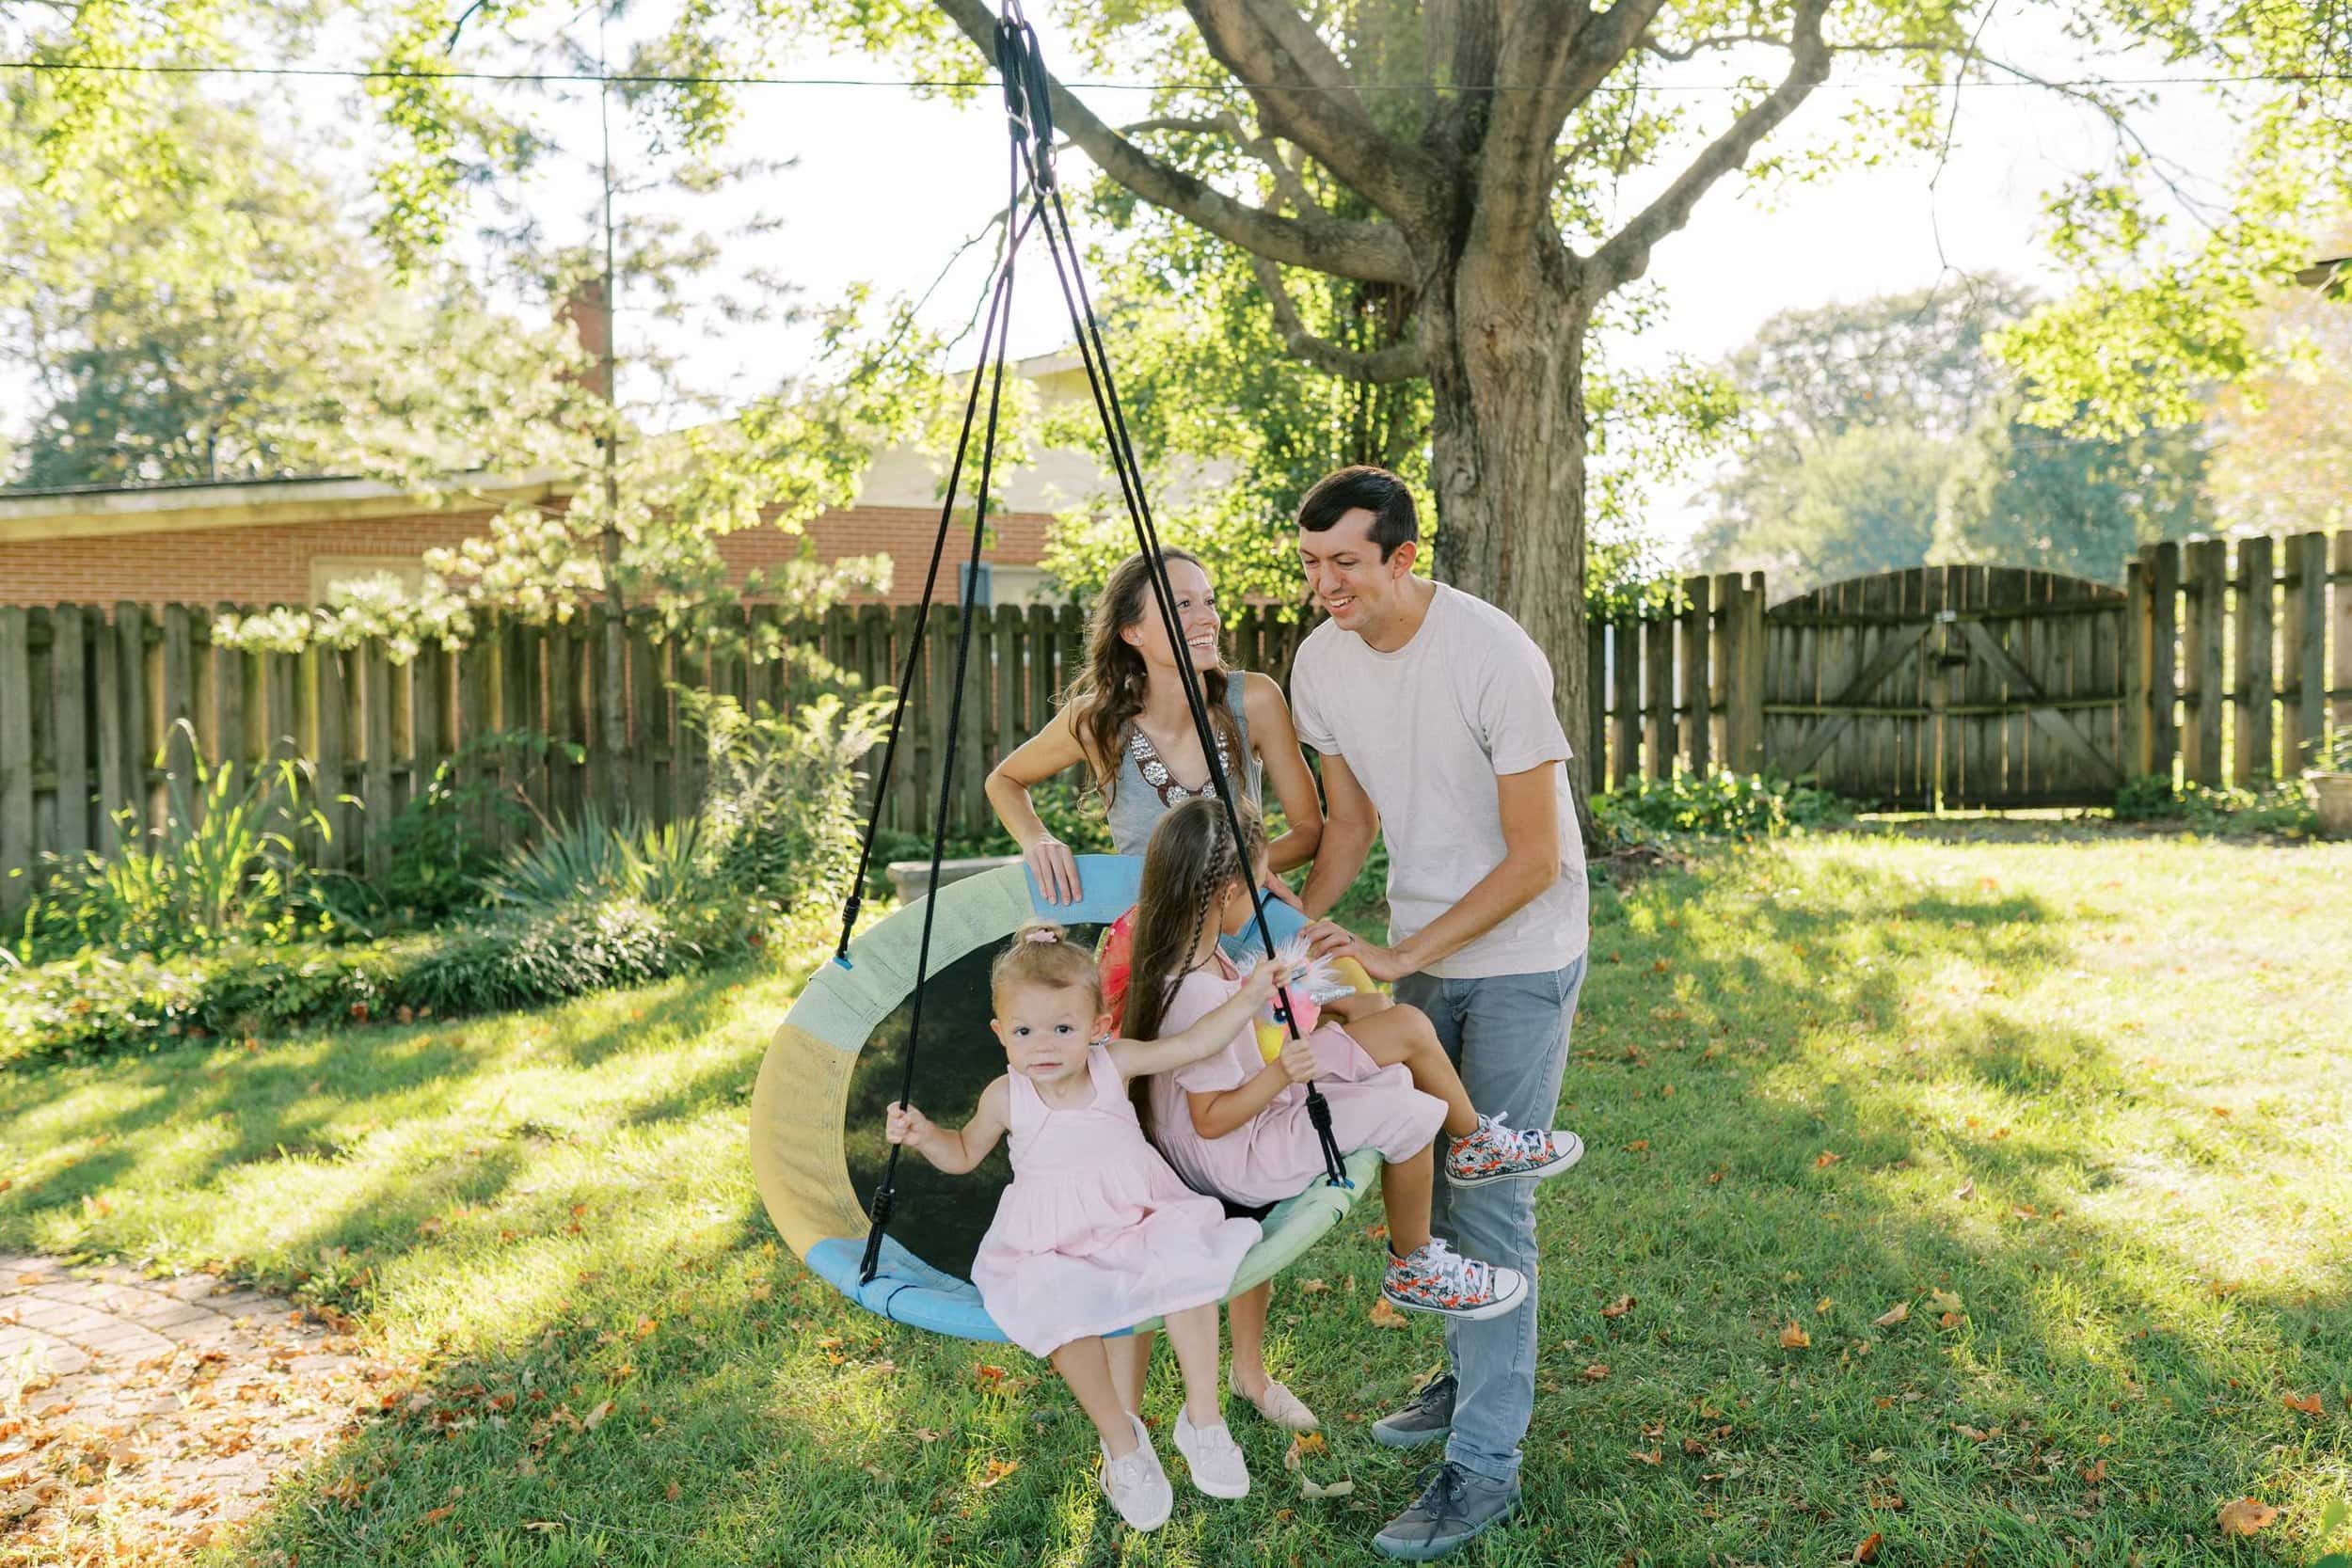 Keira and Ben push their two young daughters in a tree swing in their backyard in Columbus Ohio